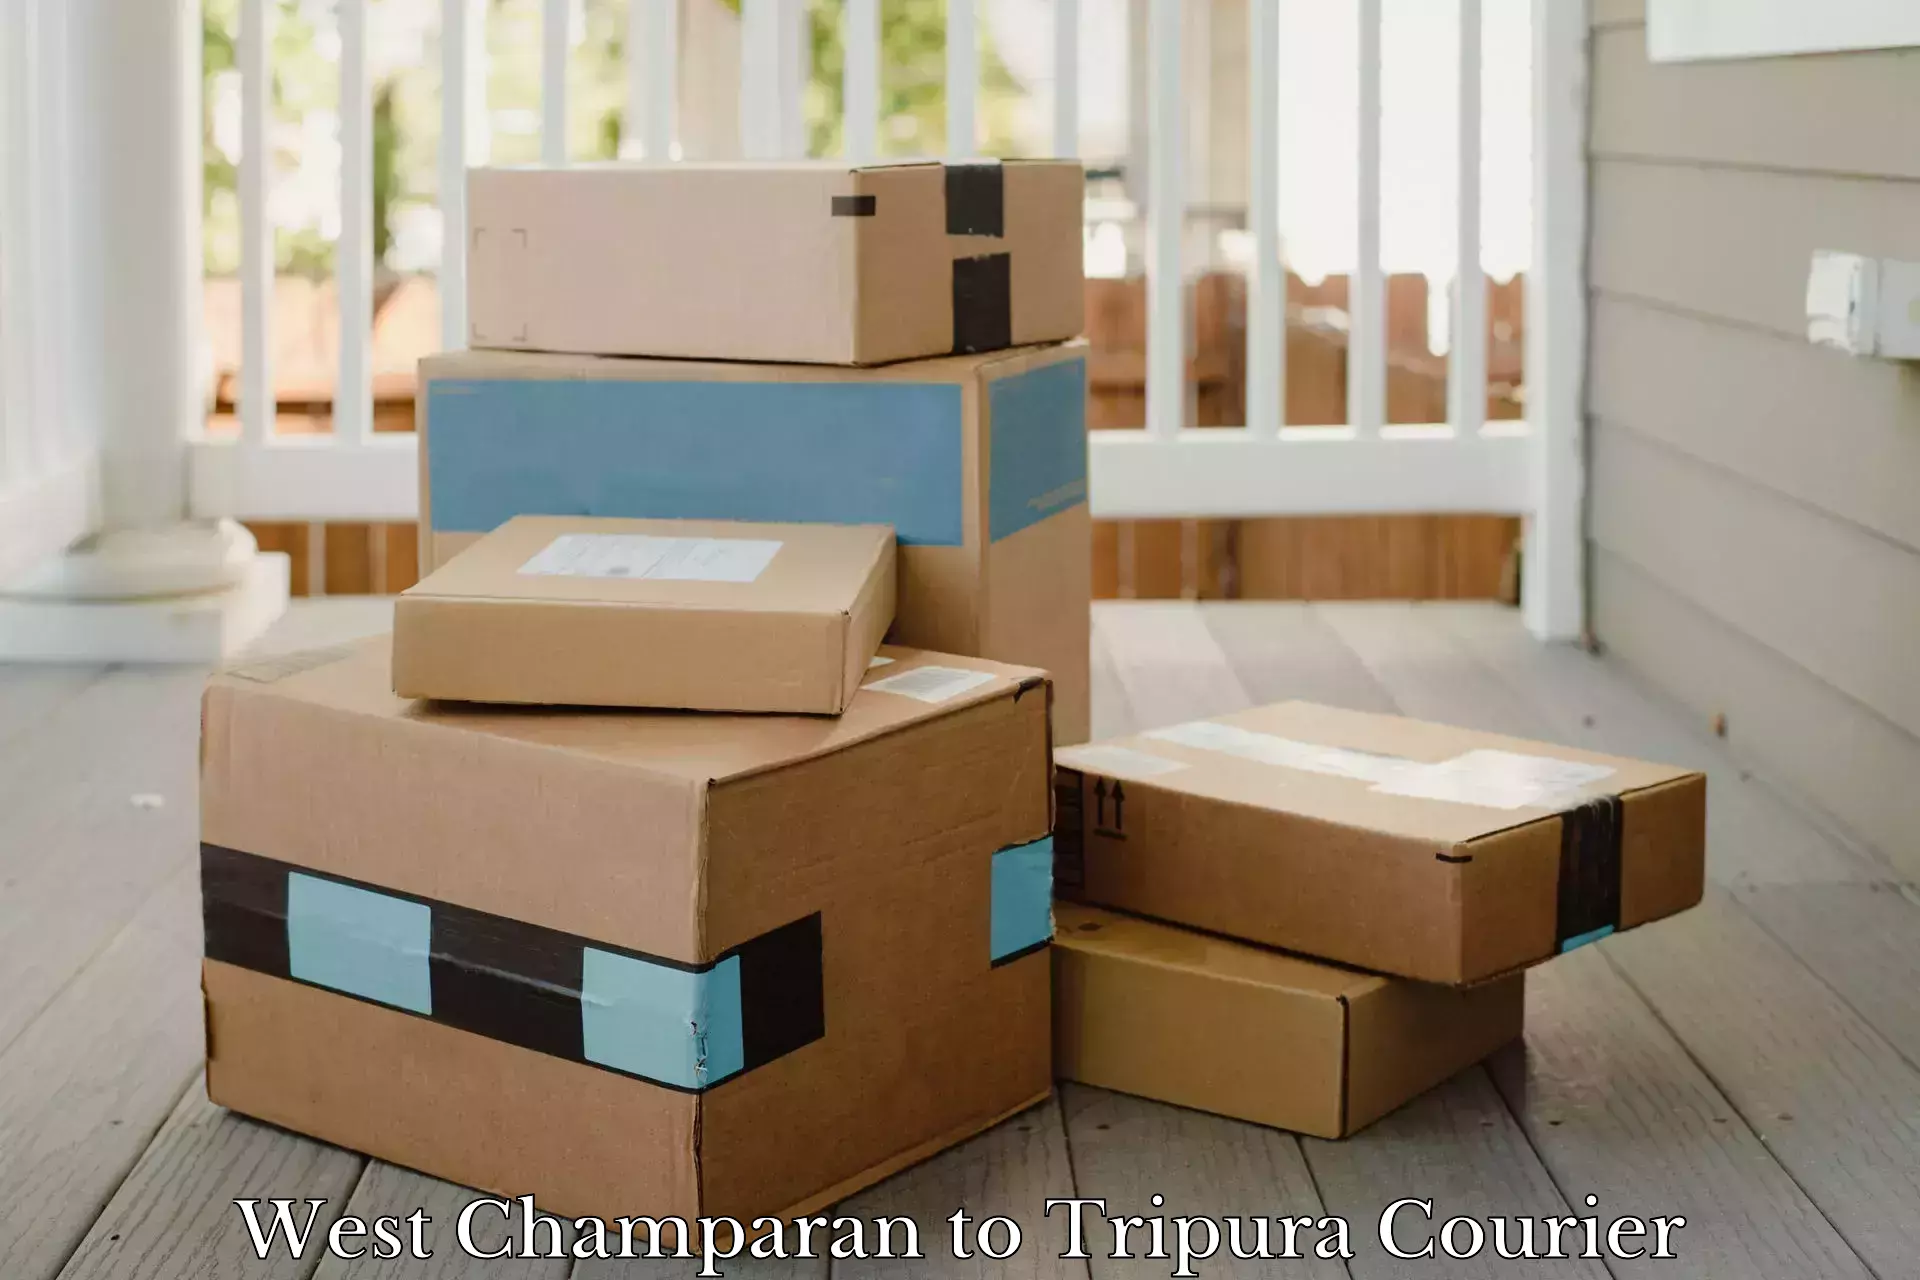 Courier service innovation West Champaran to Aambasa